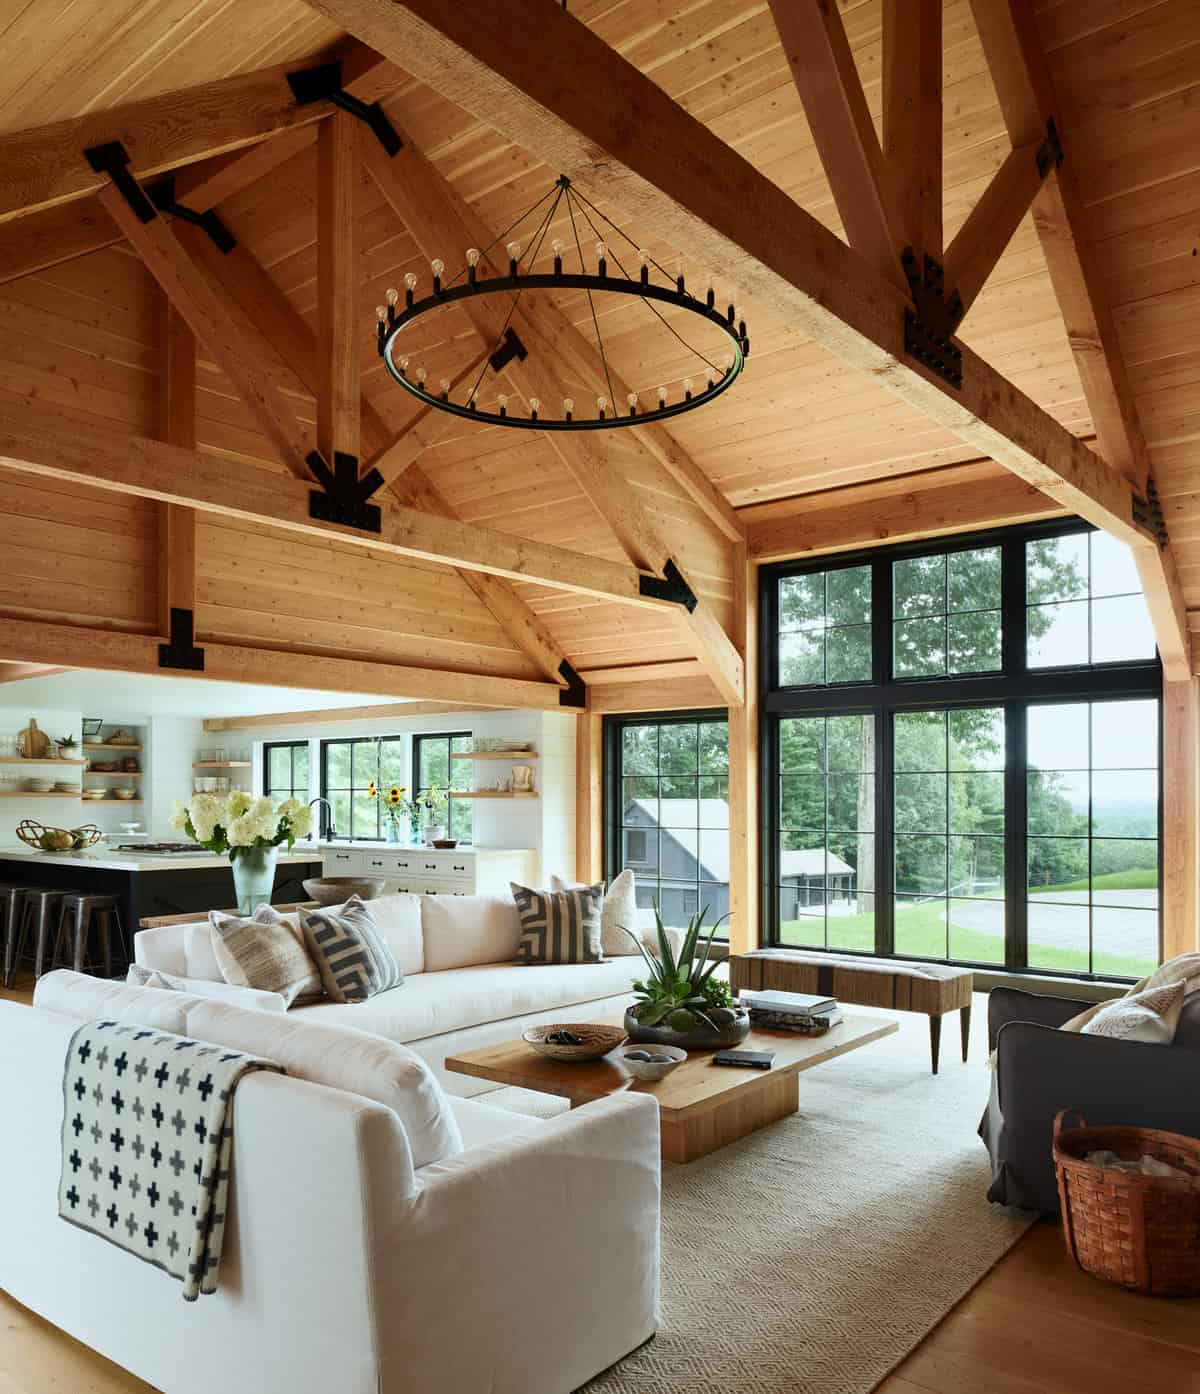 The transitional Douglas Fir exposed timber frame, with it’s rough-sawn face, is both structural and decorative. It combines traditional mortise & tenon joinery with more current black iron connecting plates. The result is rustic, yet sophisticated, adding warmth and stunning architectural detail to the home. All ceiling paneling is also rough sawn Douglas Fir to match the timbers.